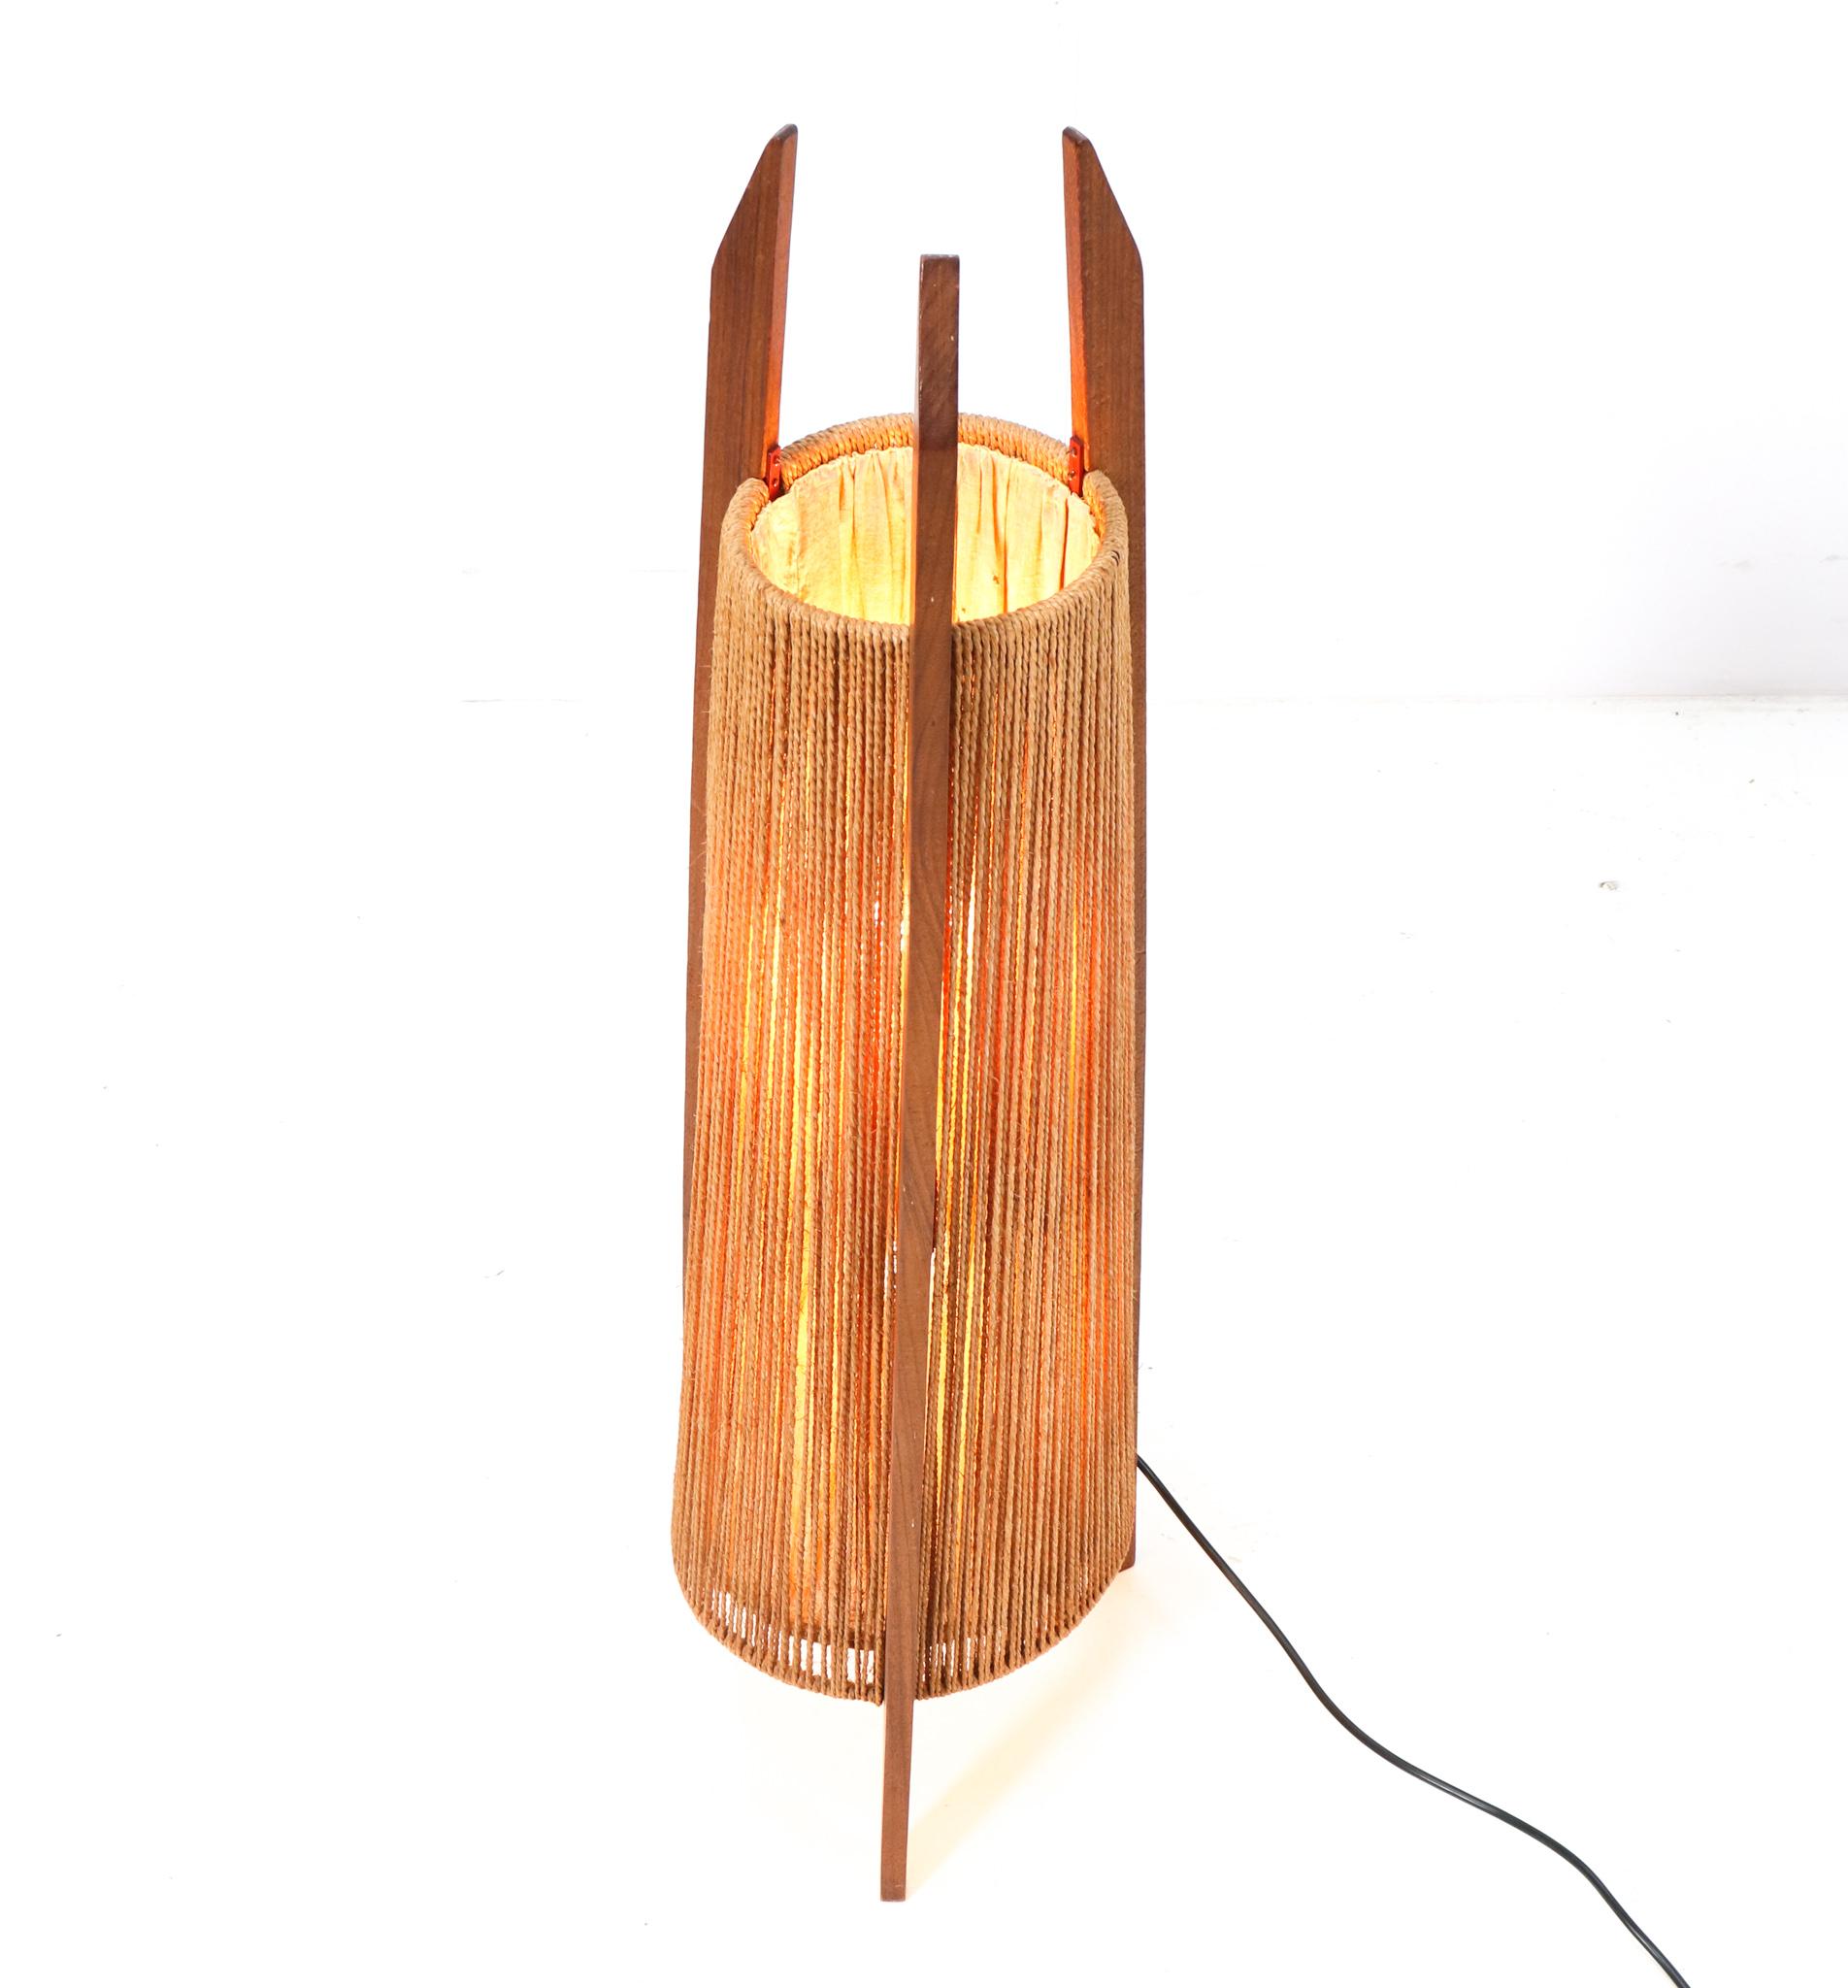 Amazing and rare Mid-Century Modern floor lamp.
Striking Danish design from the 1960s.
Solid teak frame with original hemp strings to reflect the light bulbs.
This wonderful Mid-Century Modern floor lamp will be a real eye-catcher in a